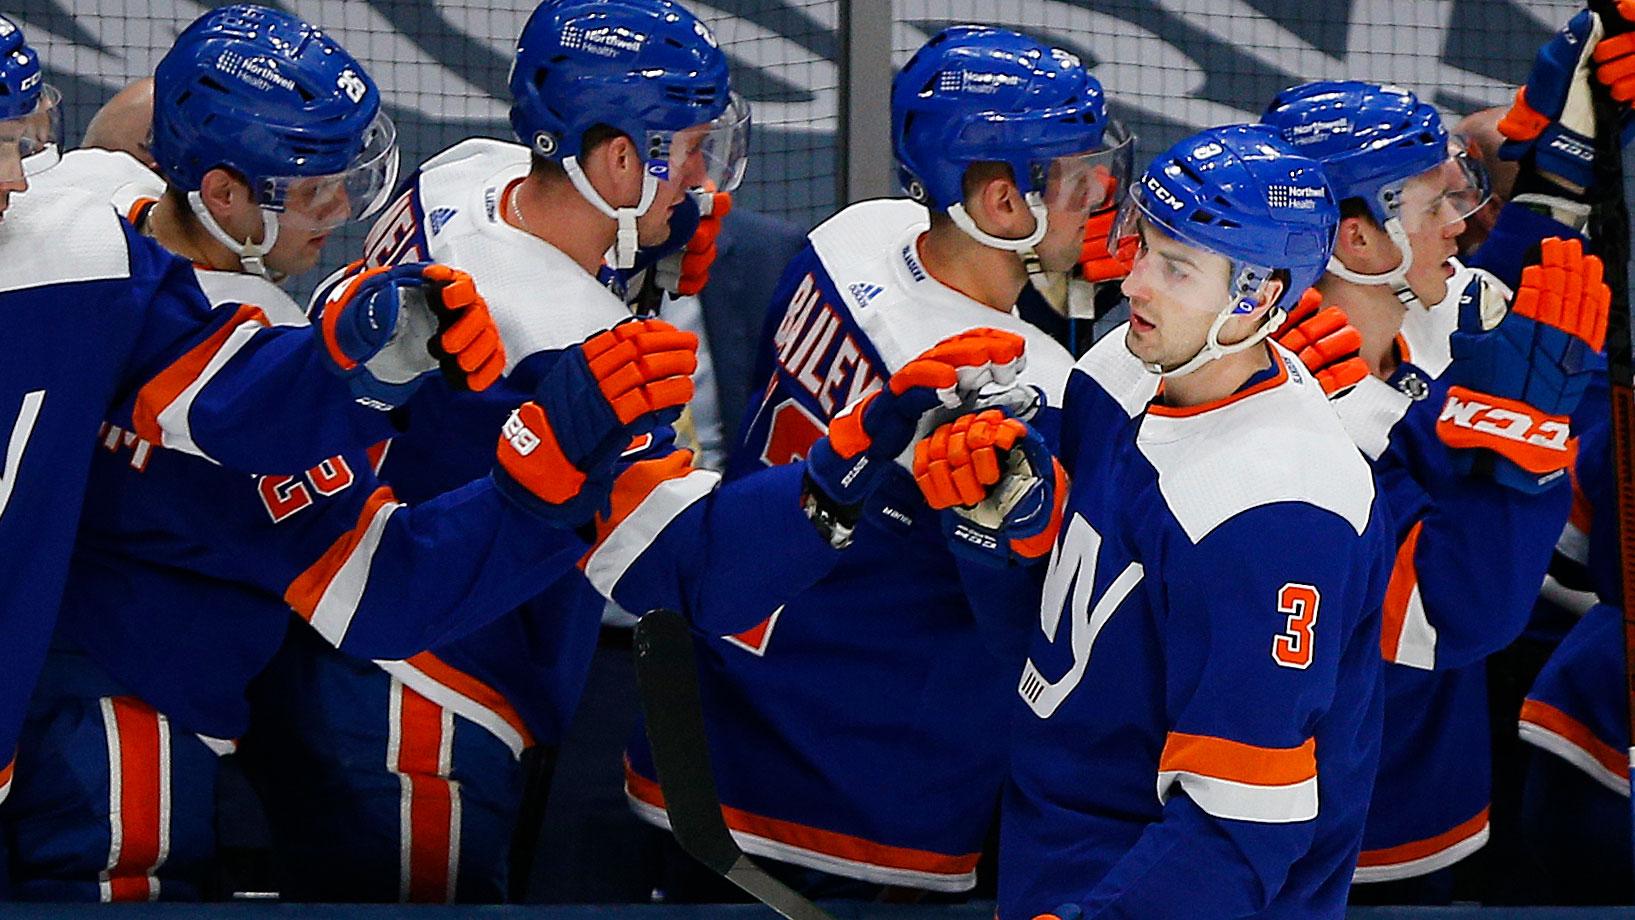 Mar 11, 2021; Uniondale, New York, USA; New York Islanders defenseman Adam Pelech (3) is congratulated after scoring a goal against the New Jersey Devils during the first period at Nassau Veterans Memorial Coliseum. / Andy Marlin-USA TODAY Sports